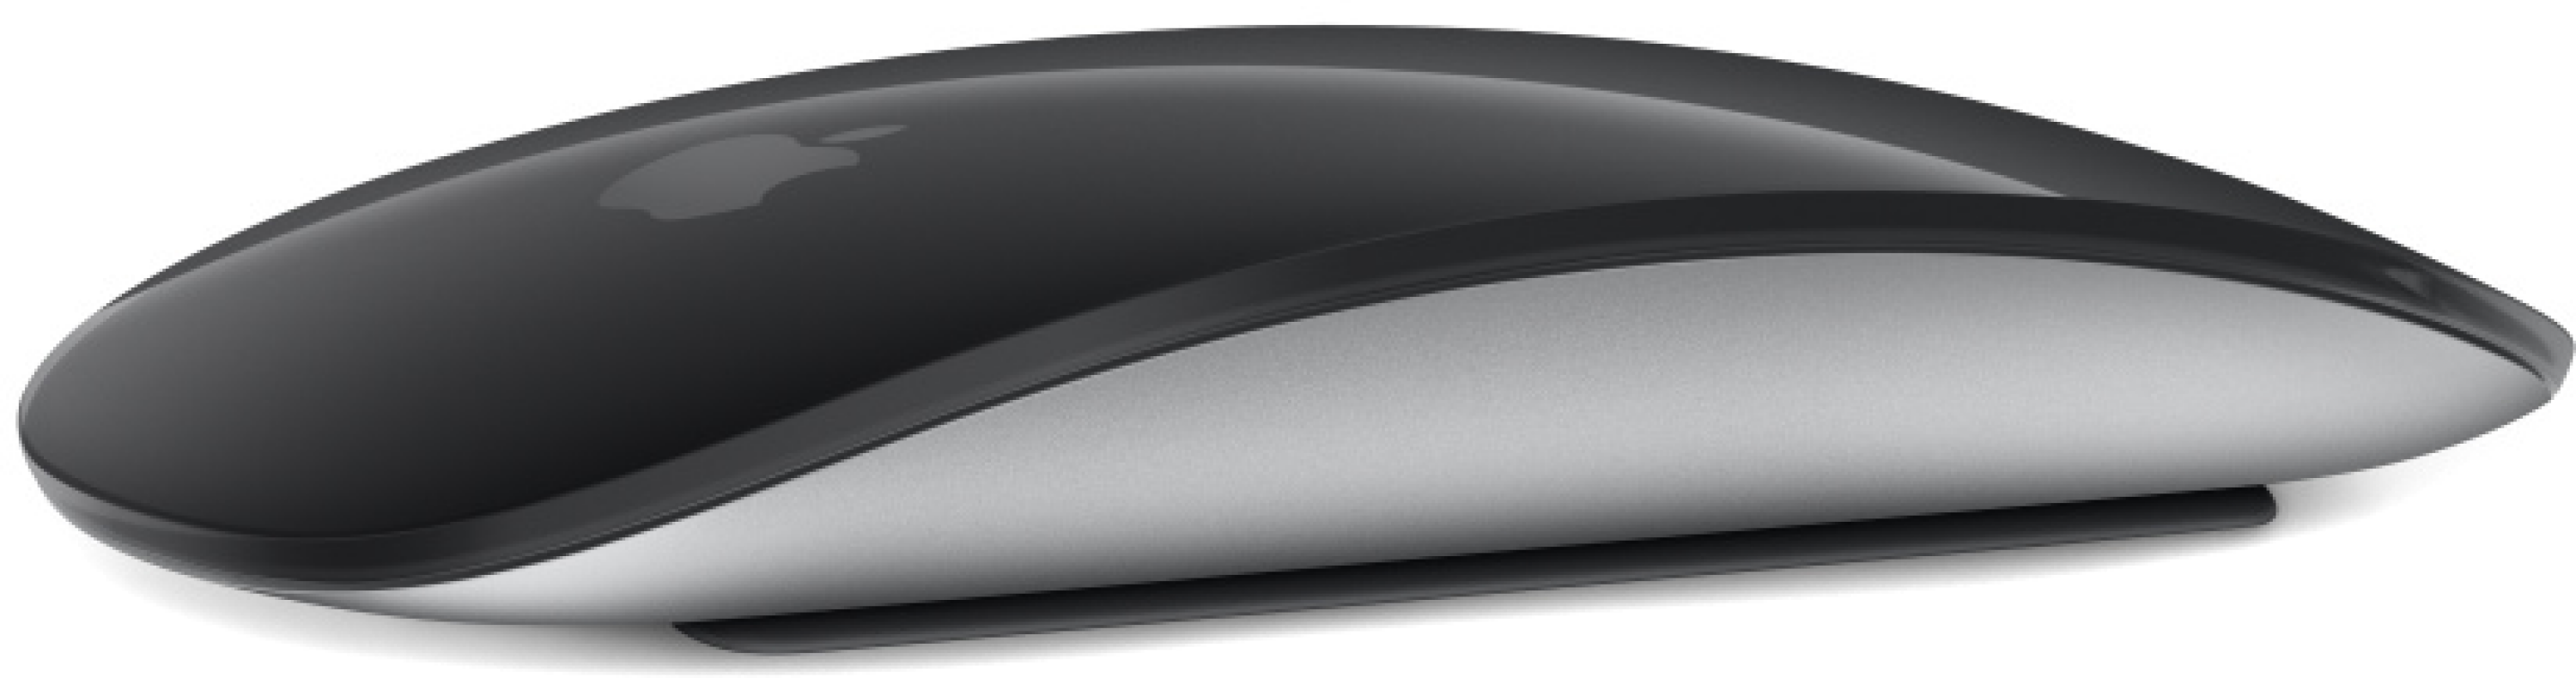 Apple Magic Mouse with USB C   Black   Sweetwater